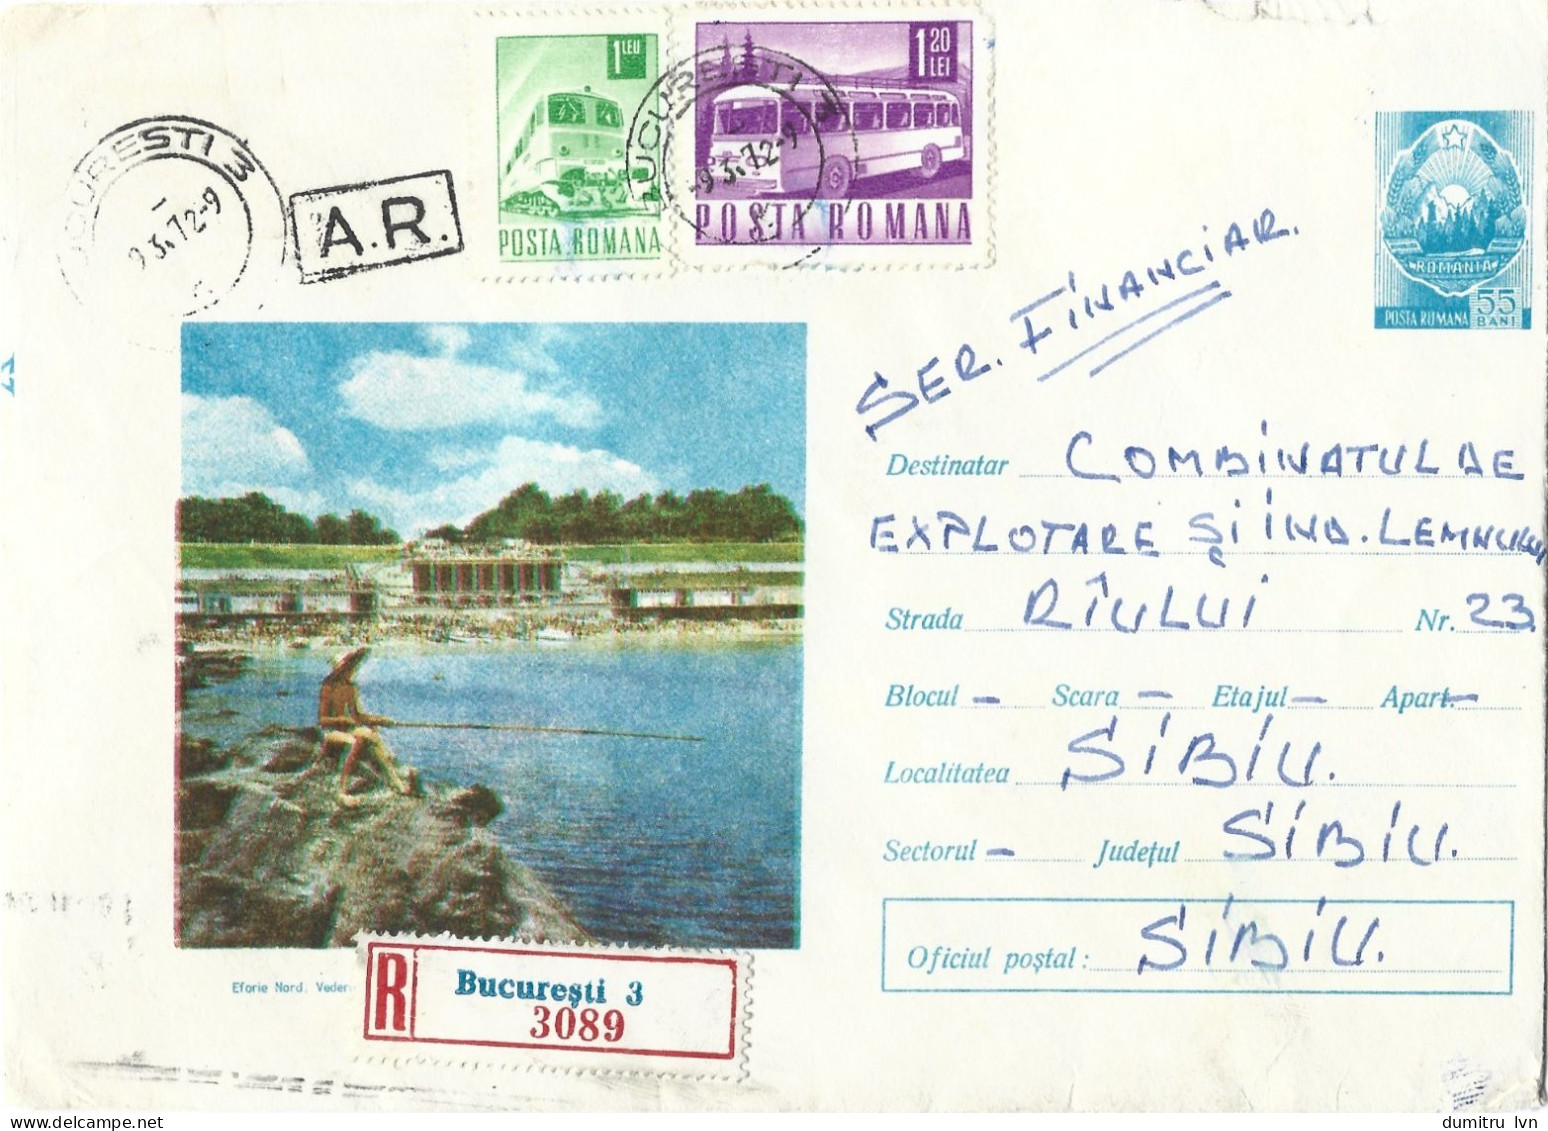 ROMANIA 1972 EFORIE NORD VIEW, PEOPLE FISHING, SEASIDE, BUILDING, BEACH, CIRCULATED ENVELOPE, COVER STATIONERY - Enteros Postales